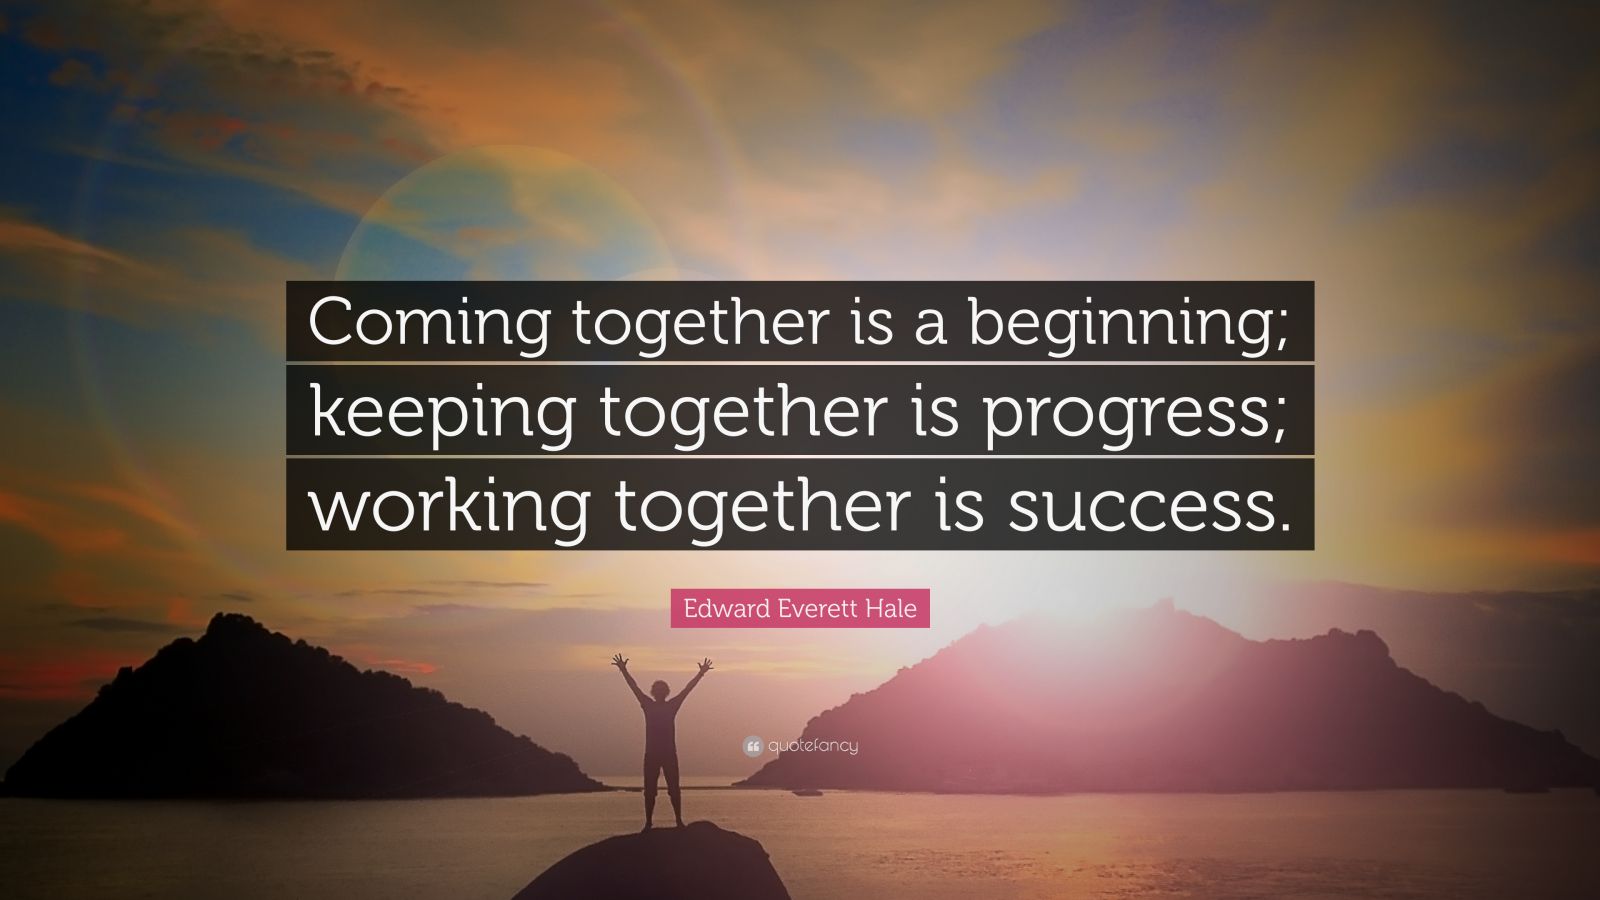 Edward Everett Hale Quote: “Coming together is a beginning; keeping ...